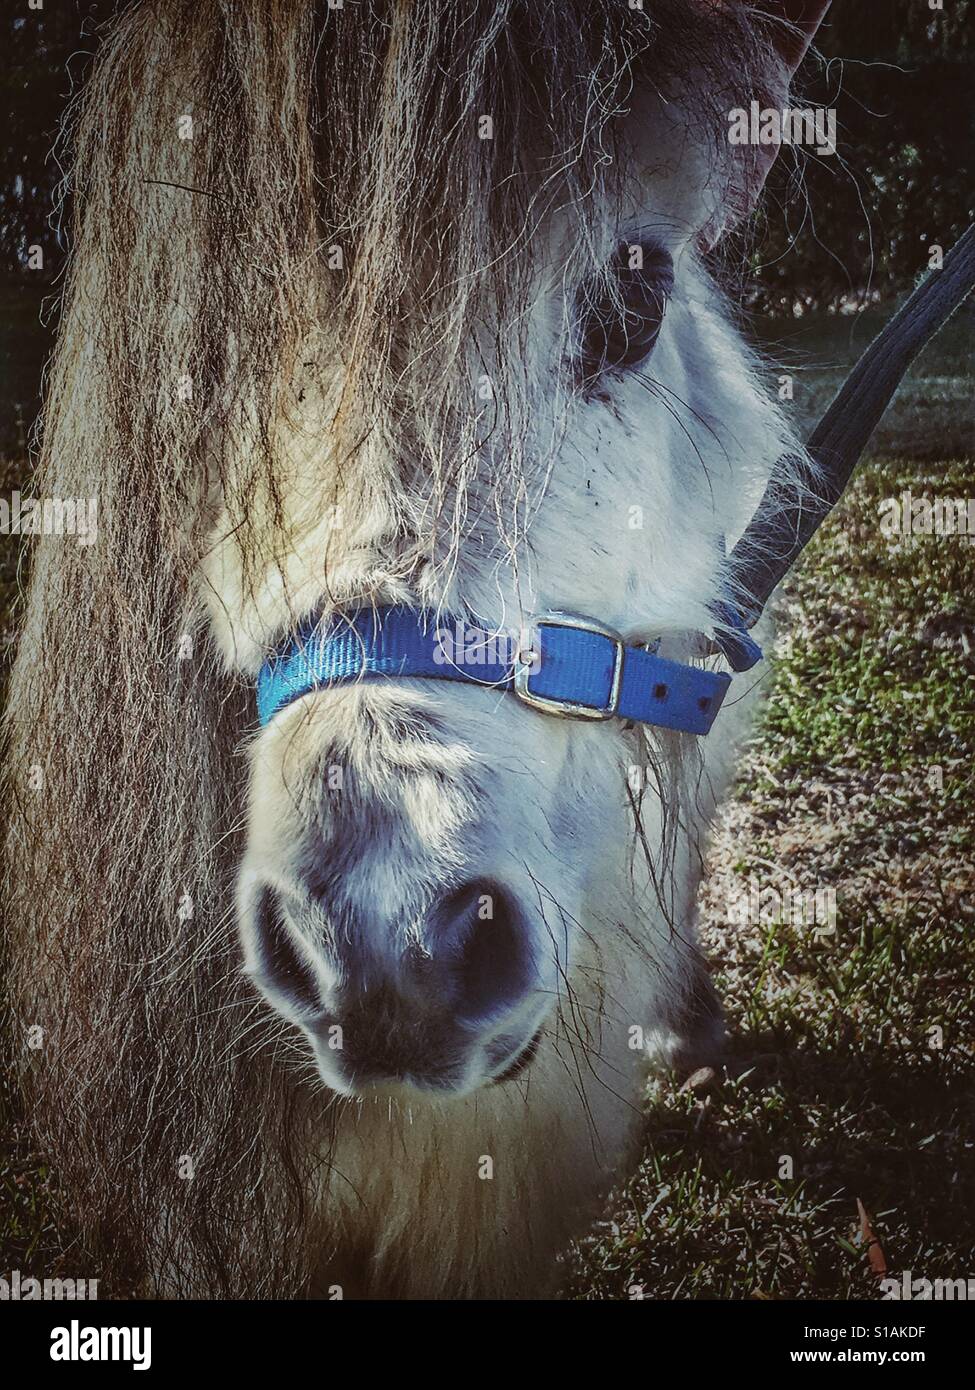 Falabella miniature horse on a lead rope, owners hand on his head Stock Photo